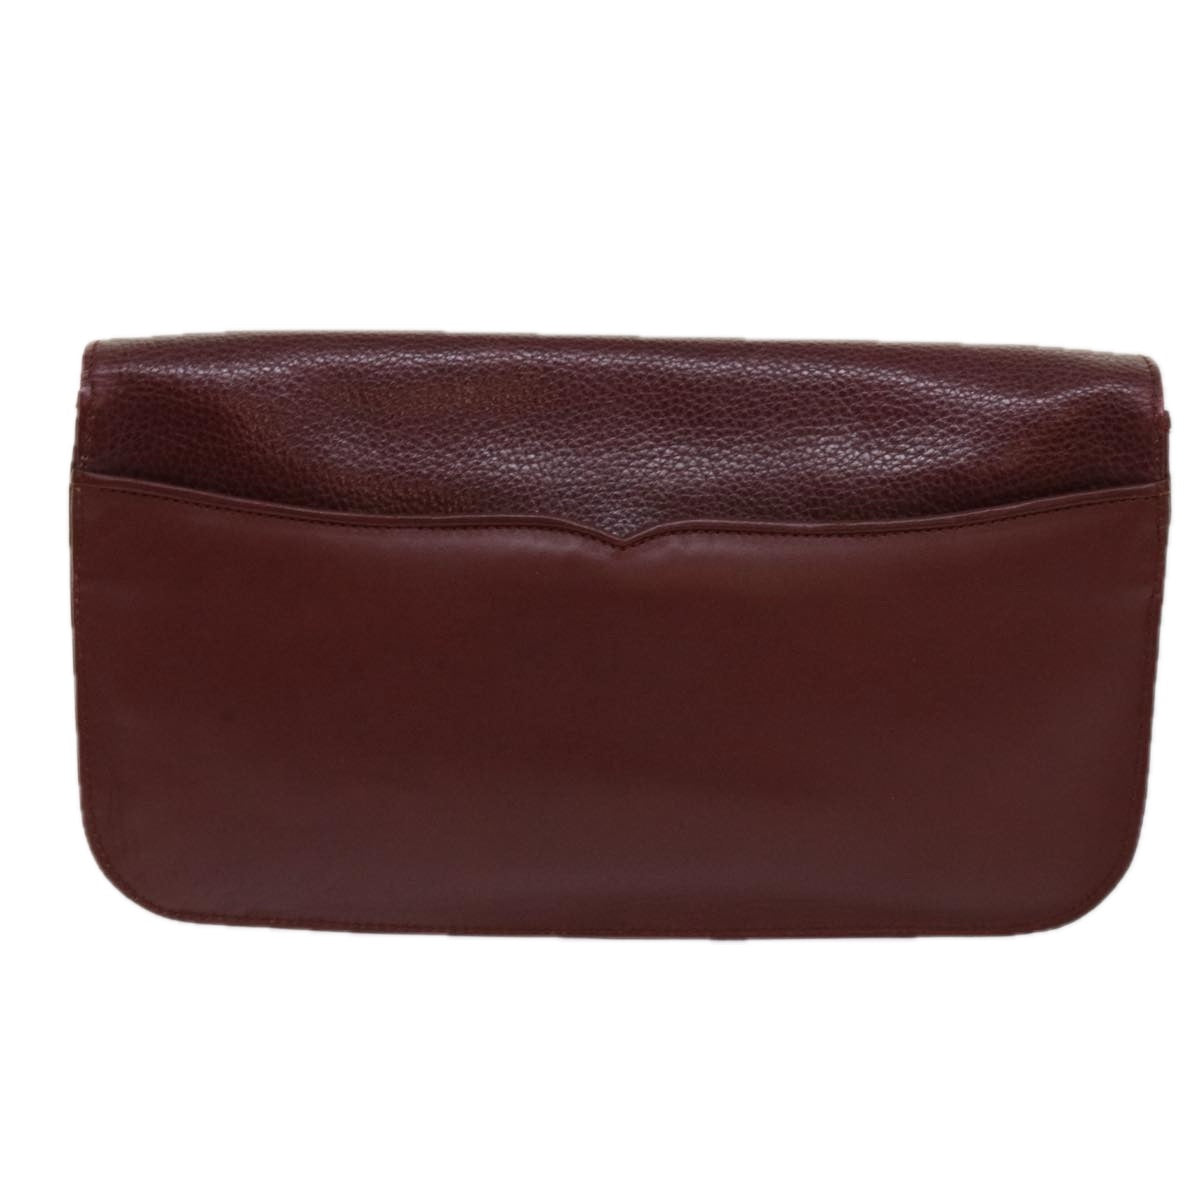 CARTIER Clutch Bag Leather Wine Red Auth ar11246